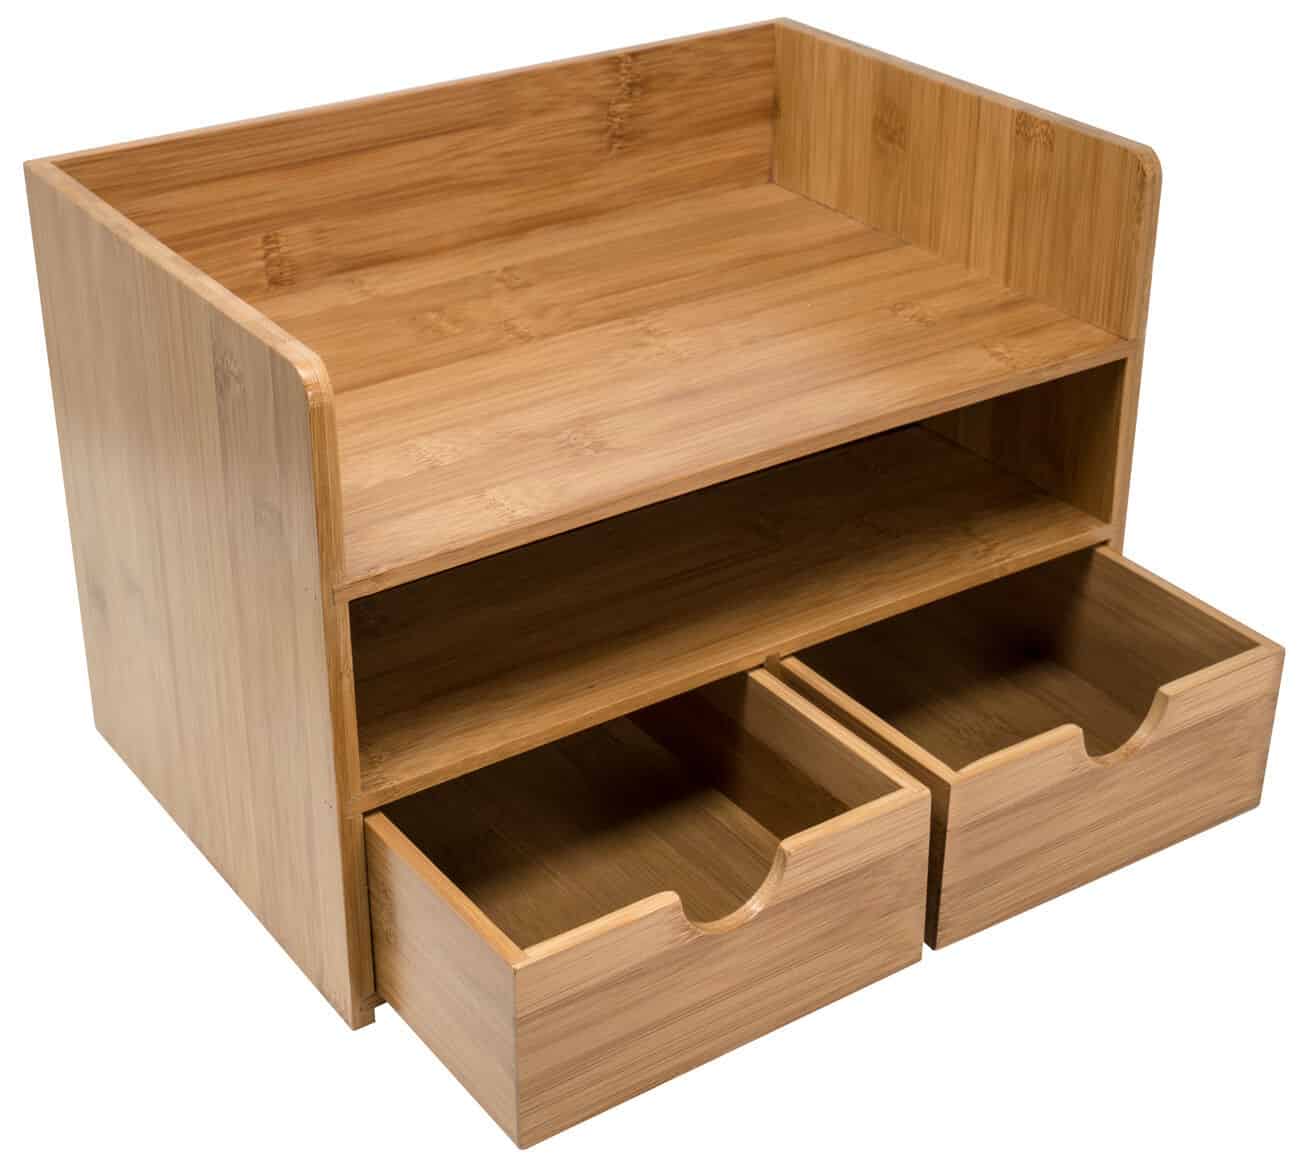 A wooden storage bench with two drawers.